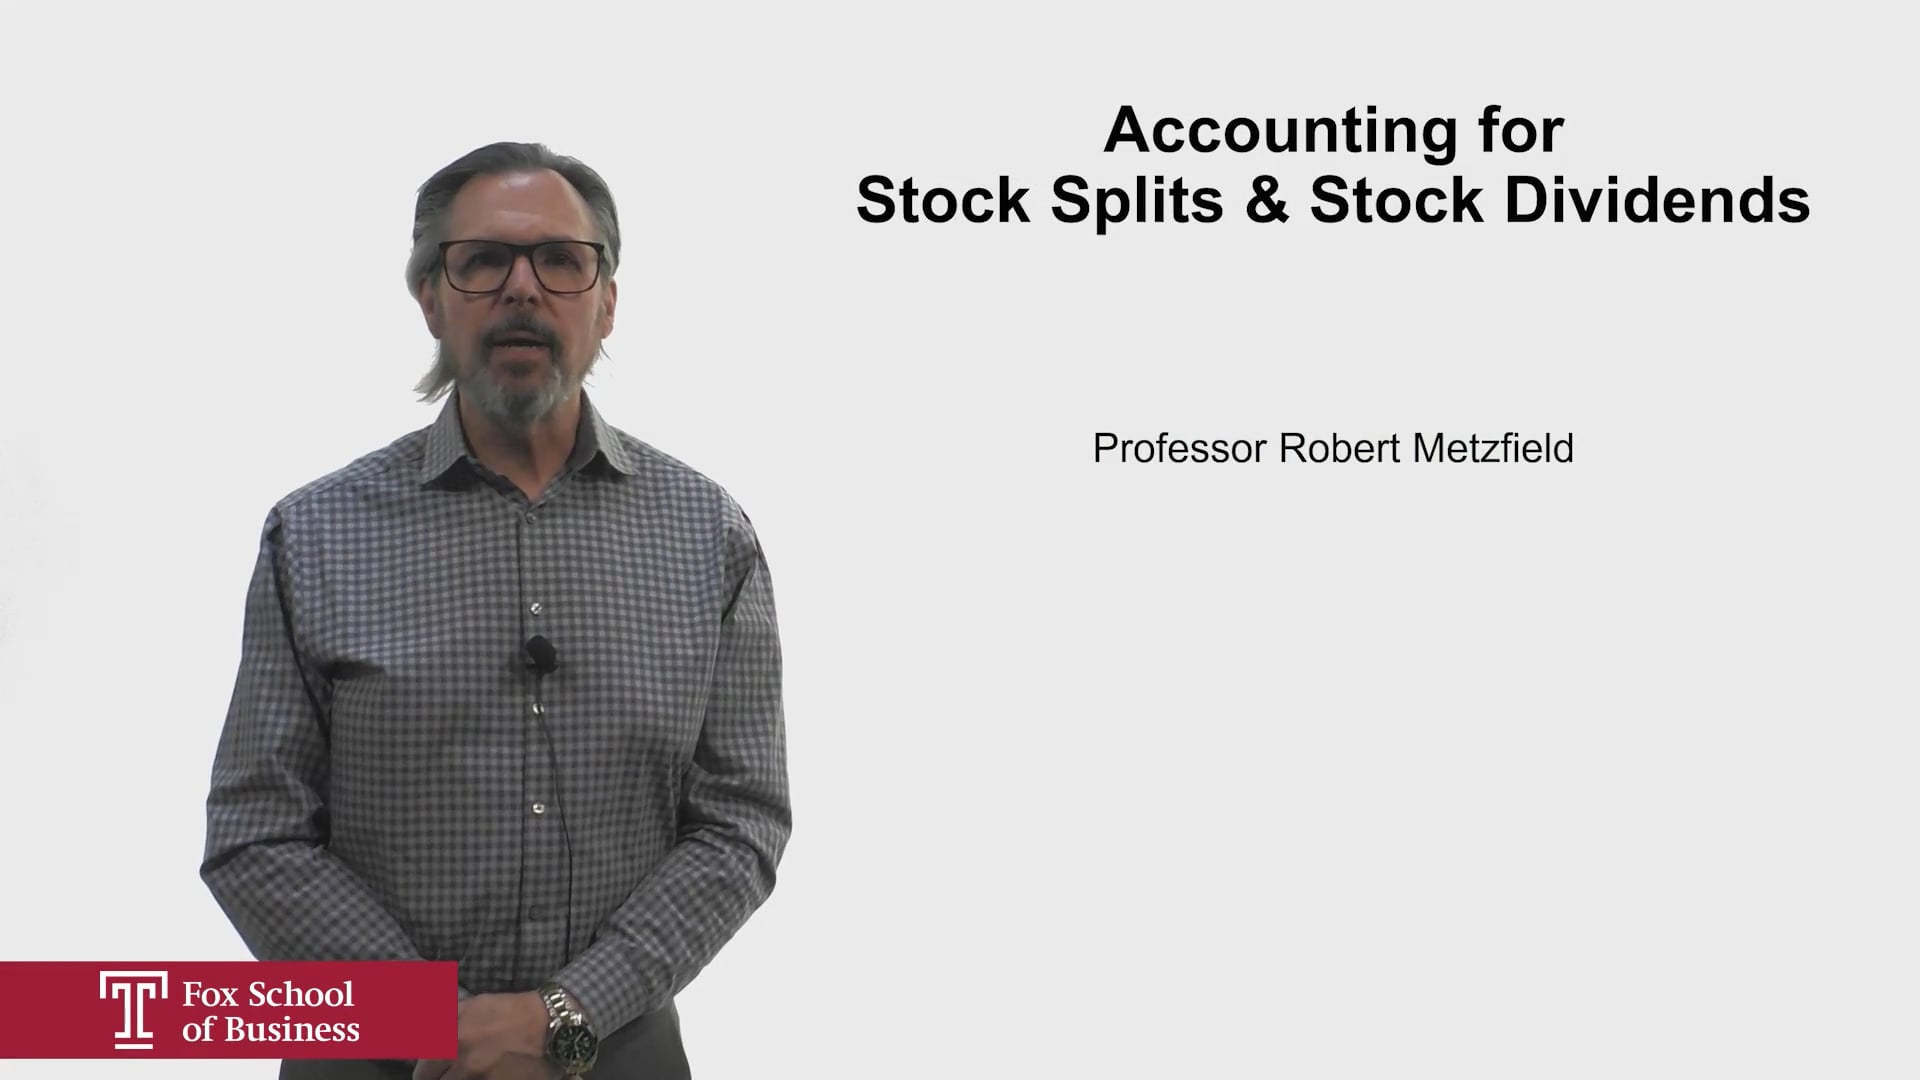 Accounting for Stock Splits & Stock Dividends